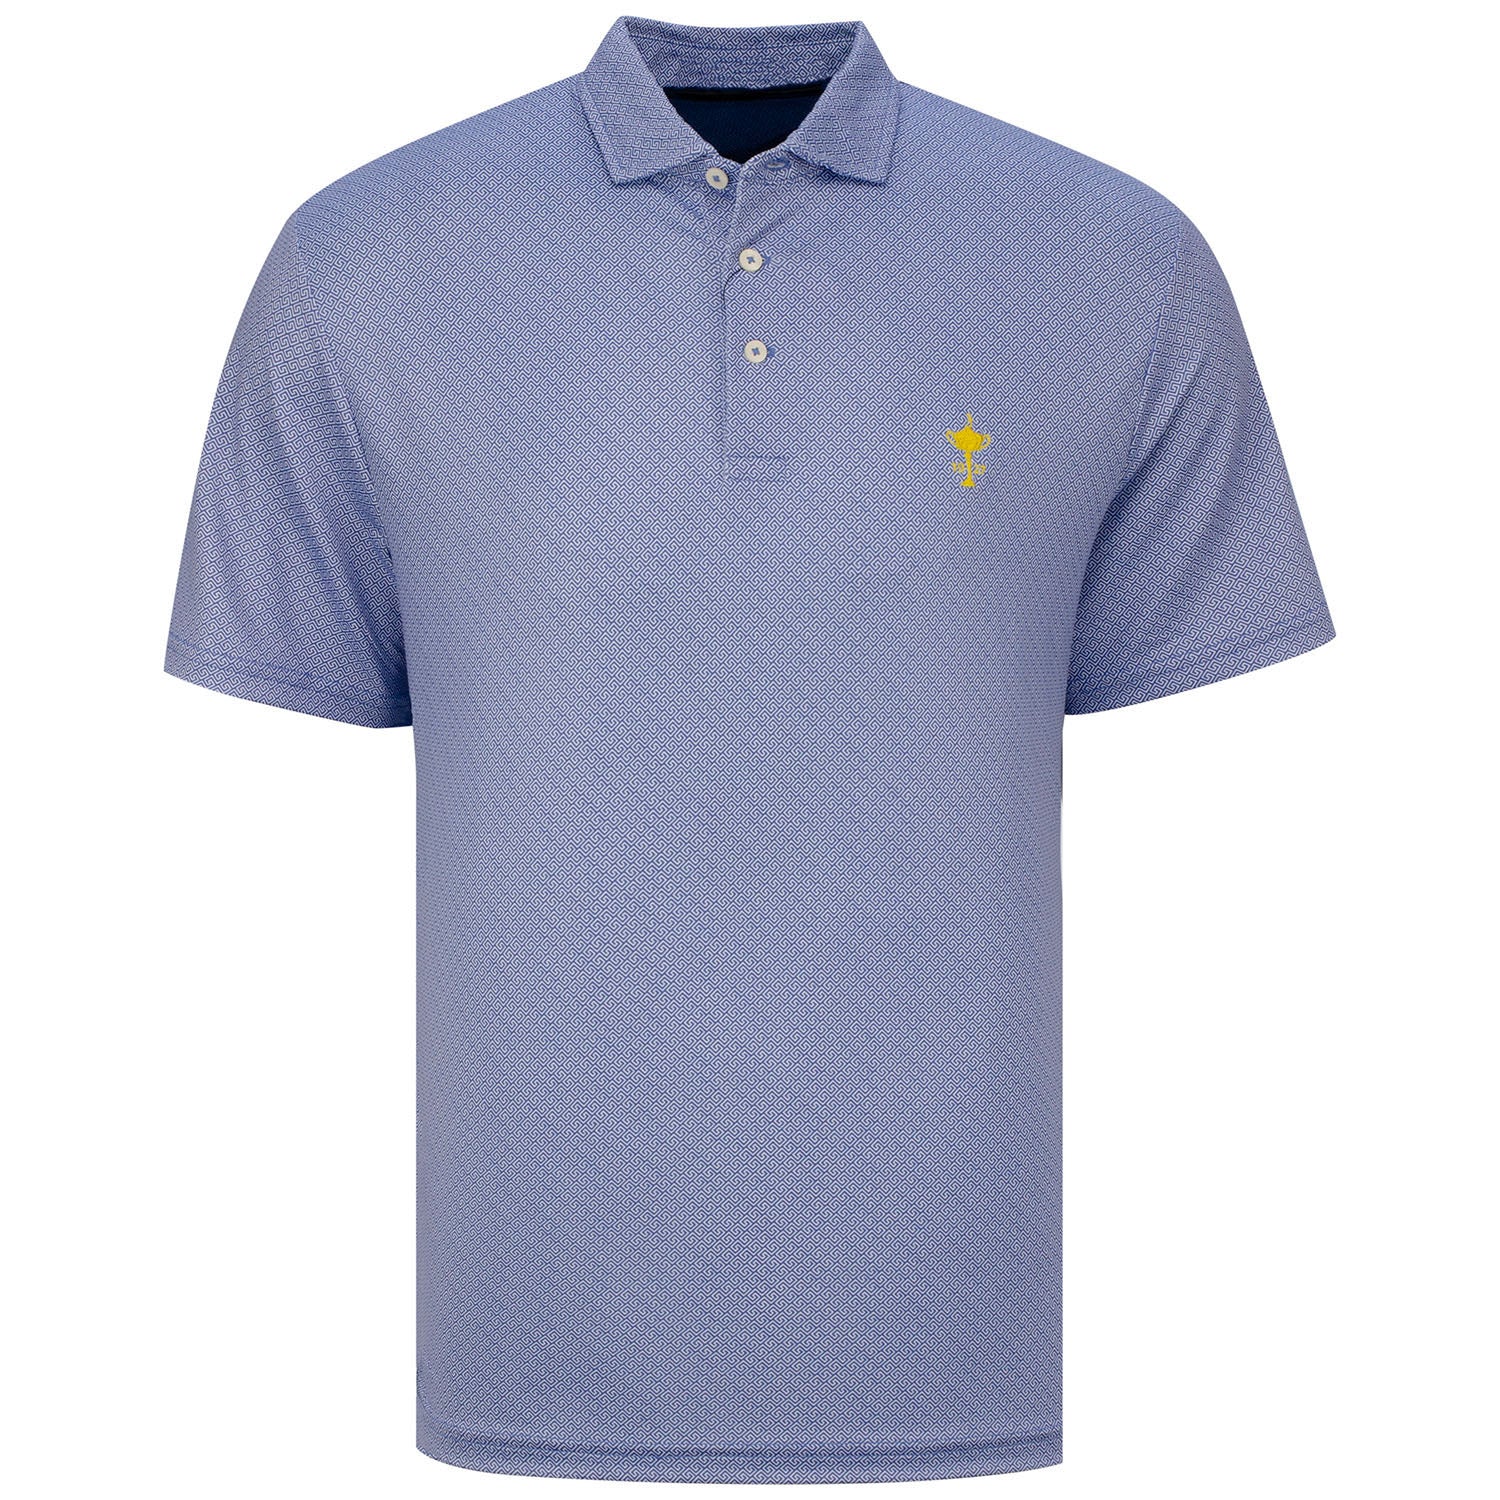 Ralph Lauren Printed Lightweight Airflow Jersey Polo in Blue- Front View'